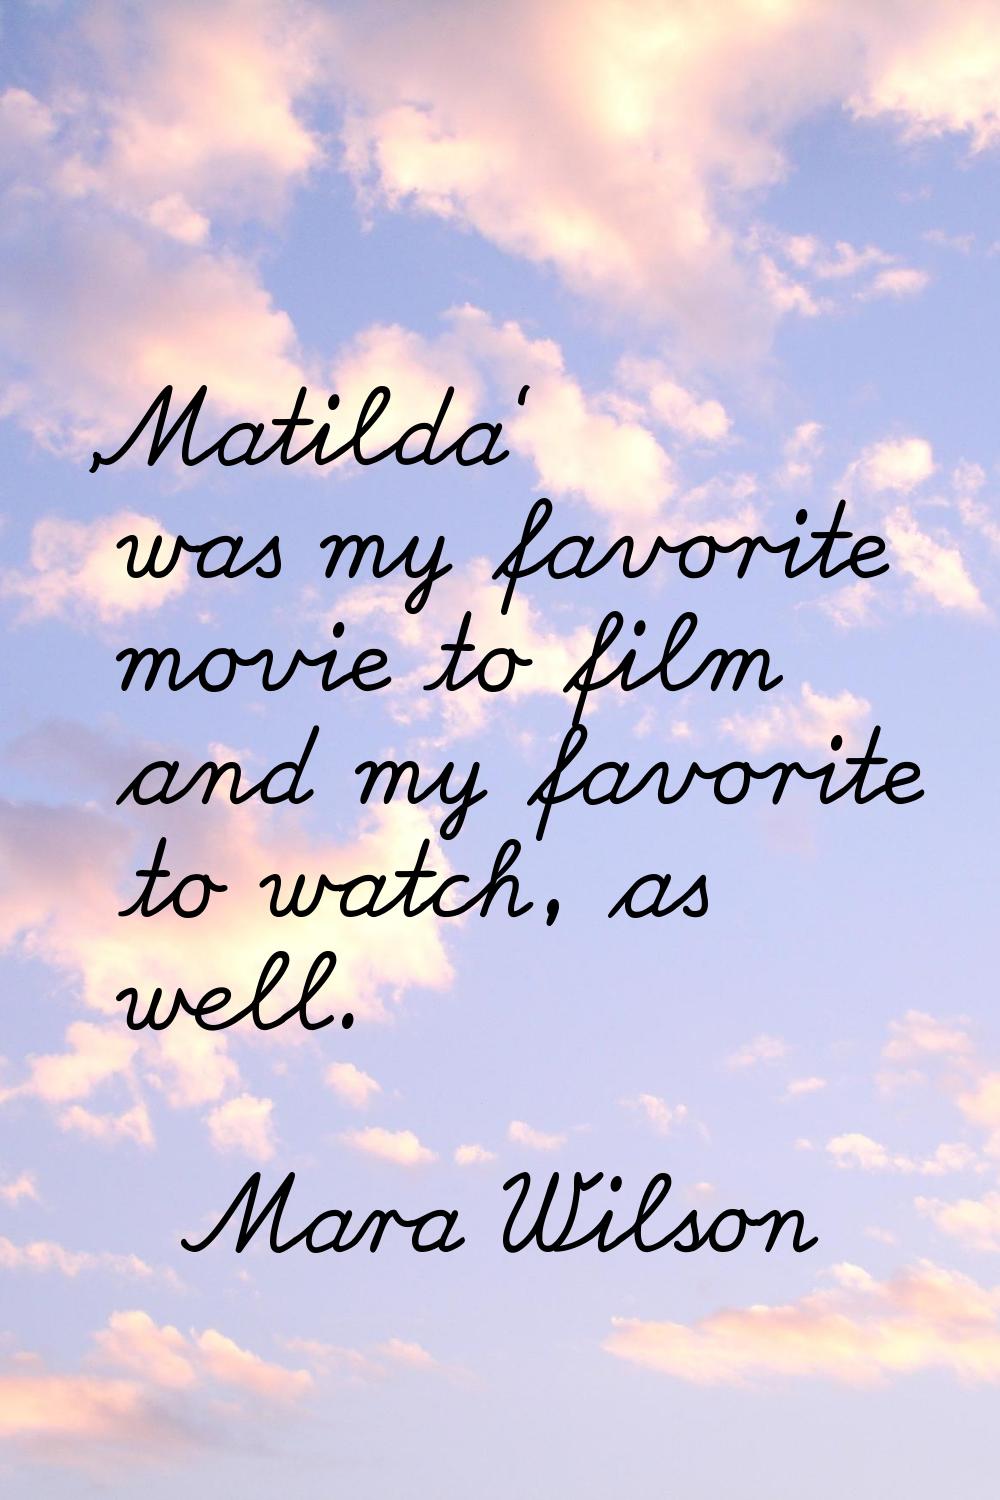 'Matilda' was my favorite movie to film and my favorite to watch, as well.